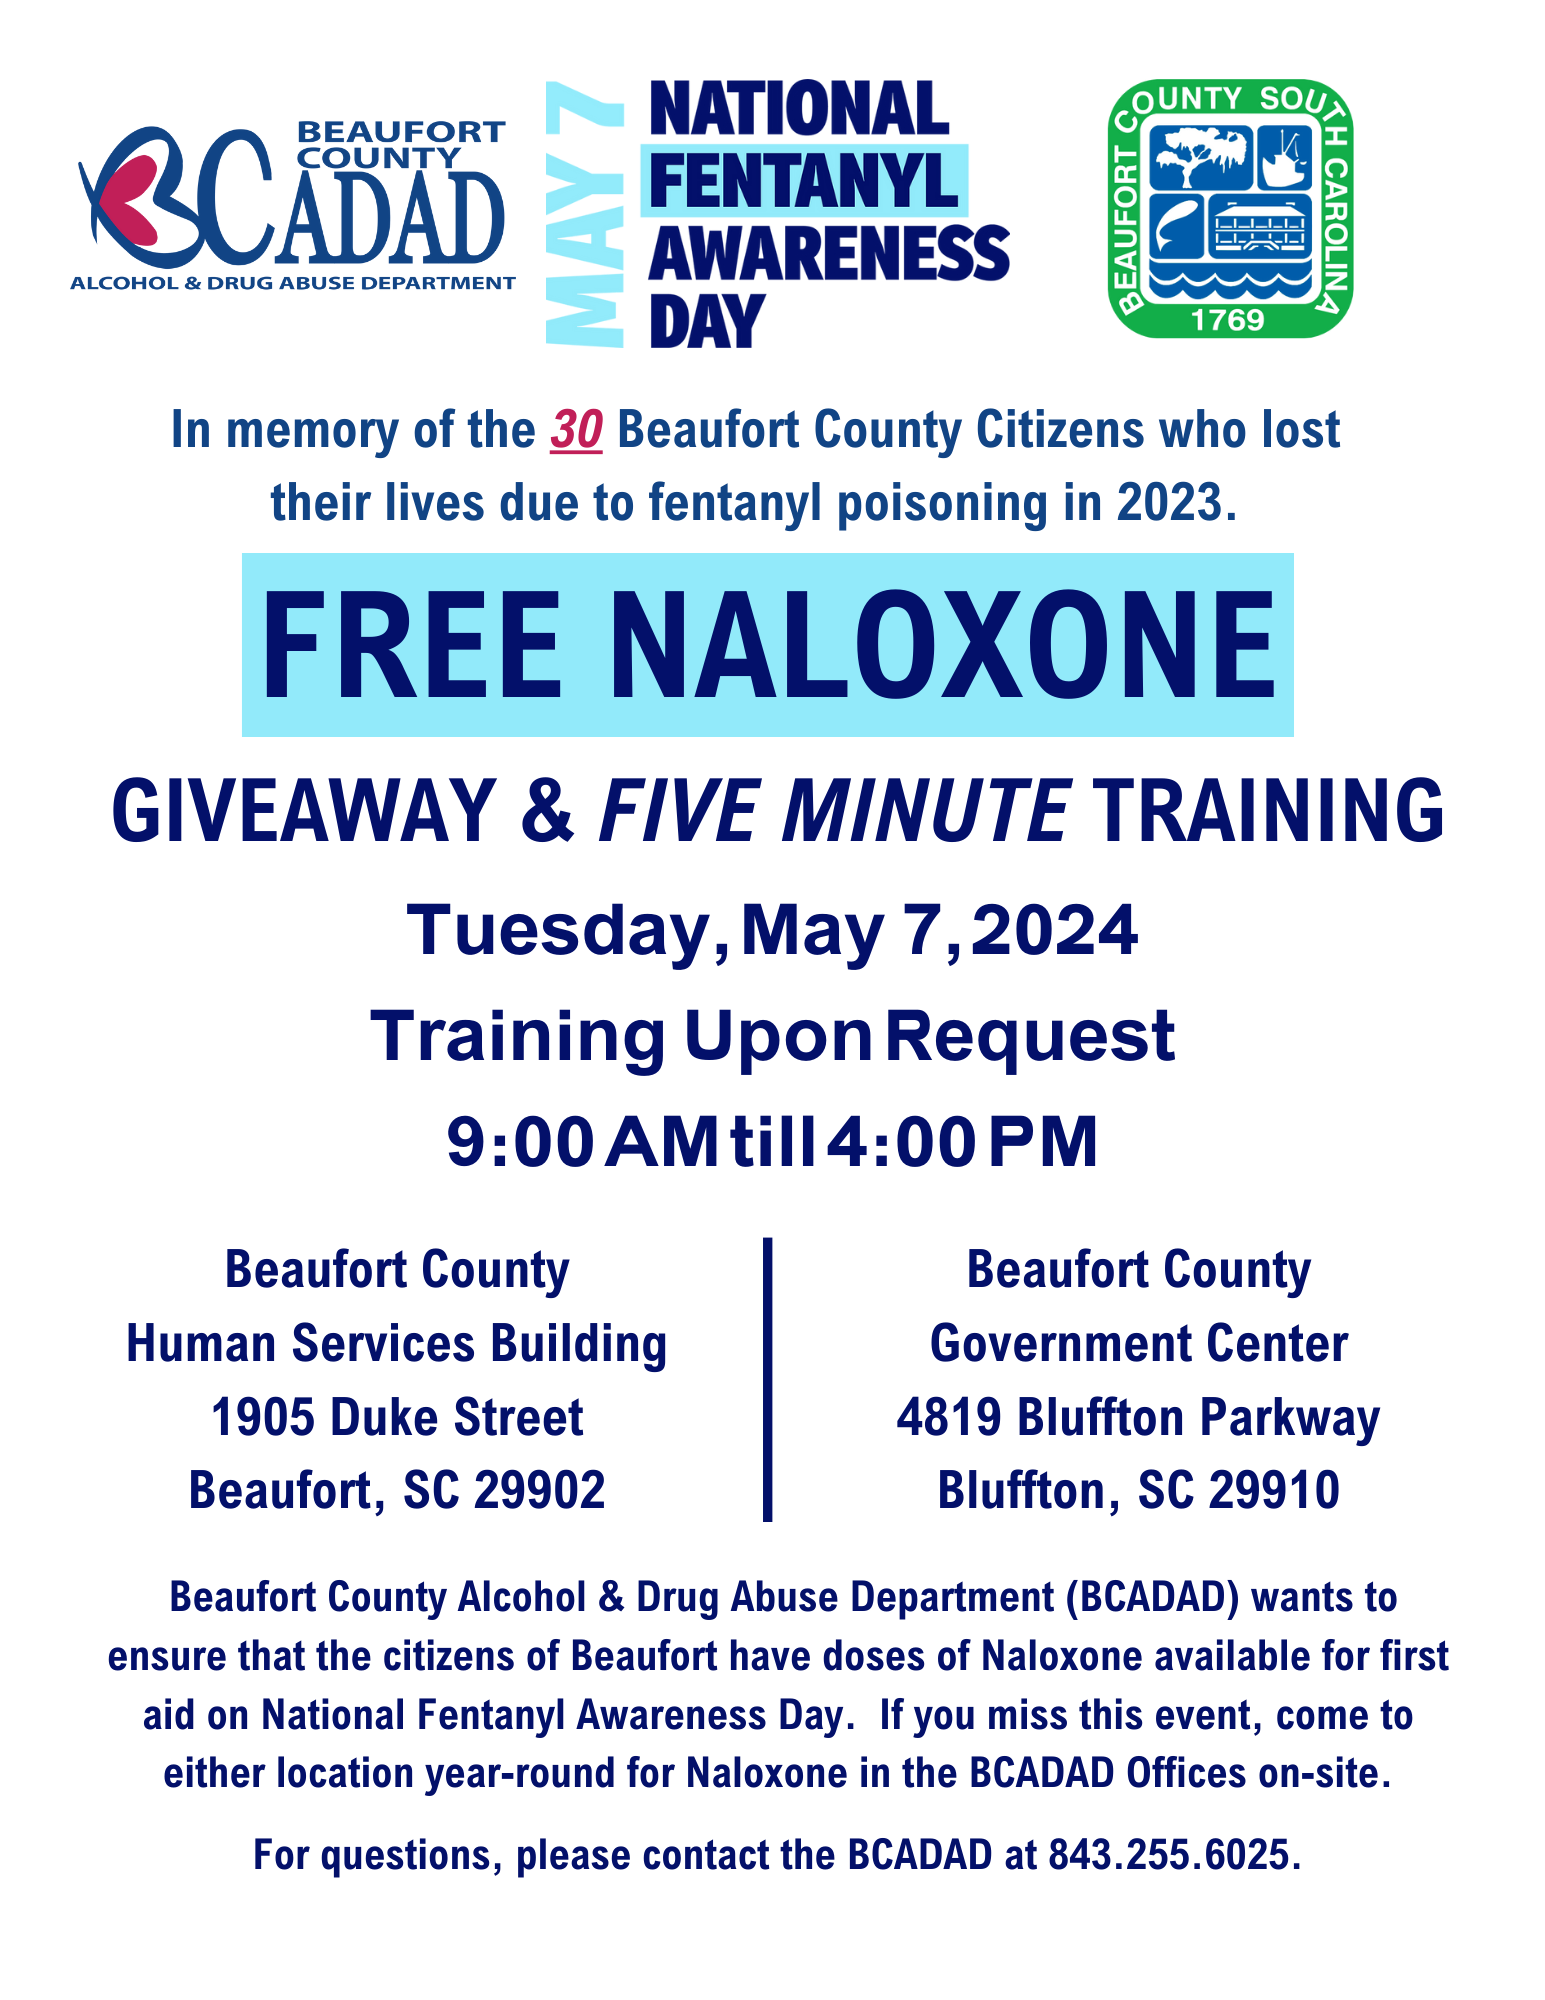 Free Naloxone and Training to be Held at Both Beaufort County Alcohol and Drug Abuse Department Locations:  Bluffton and Beaufort